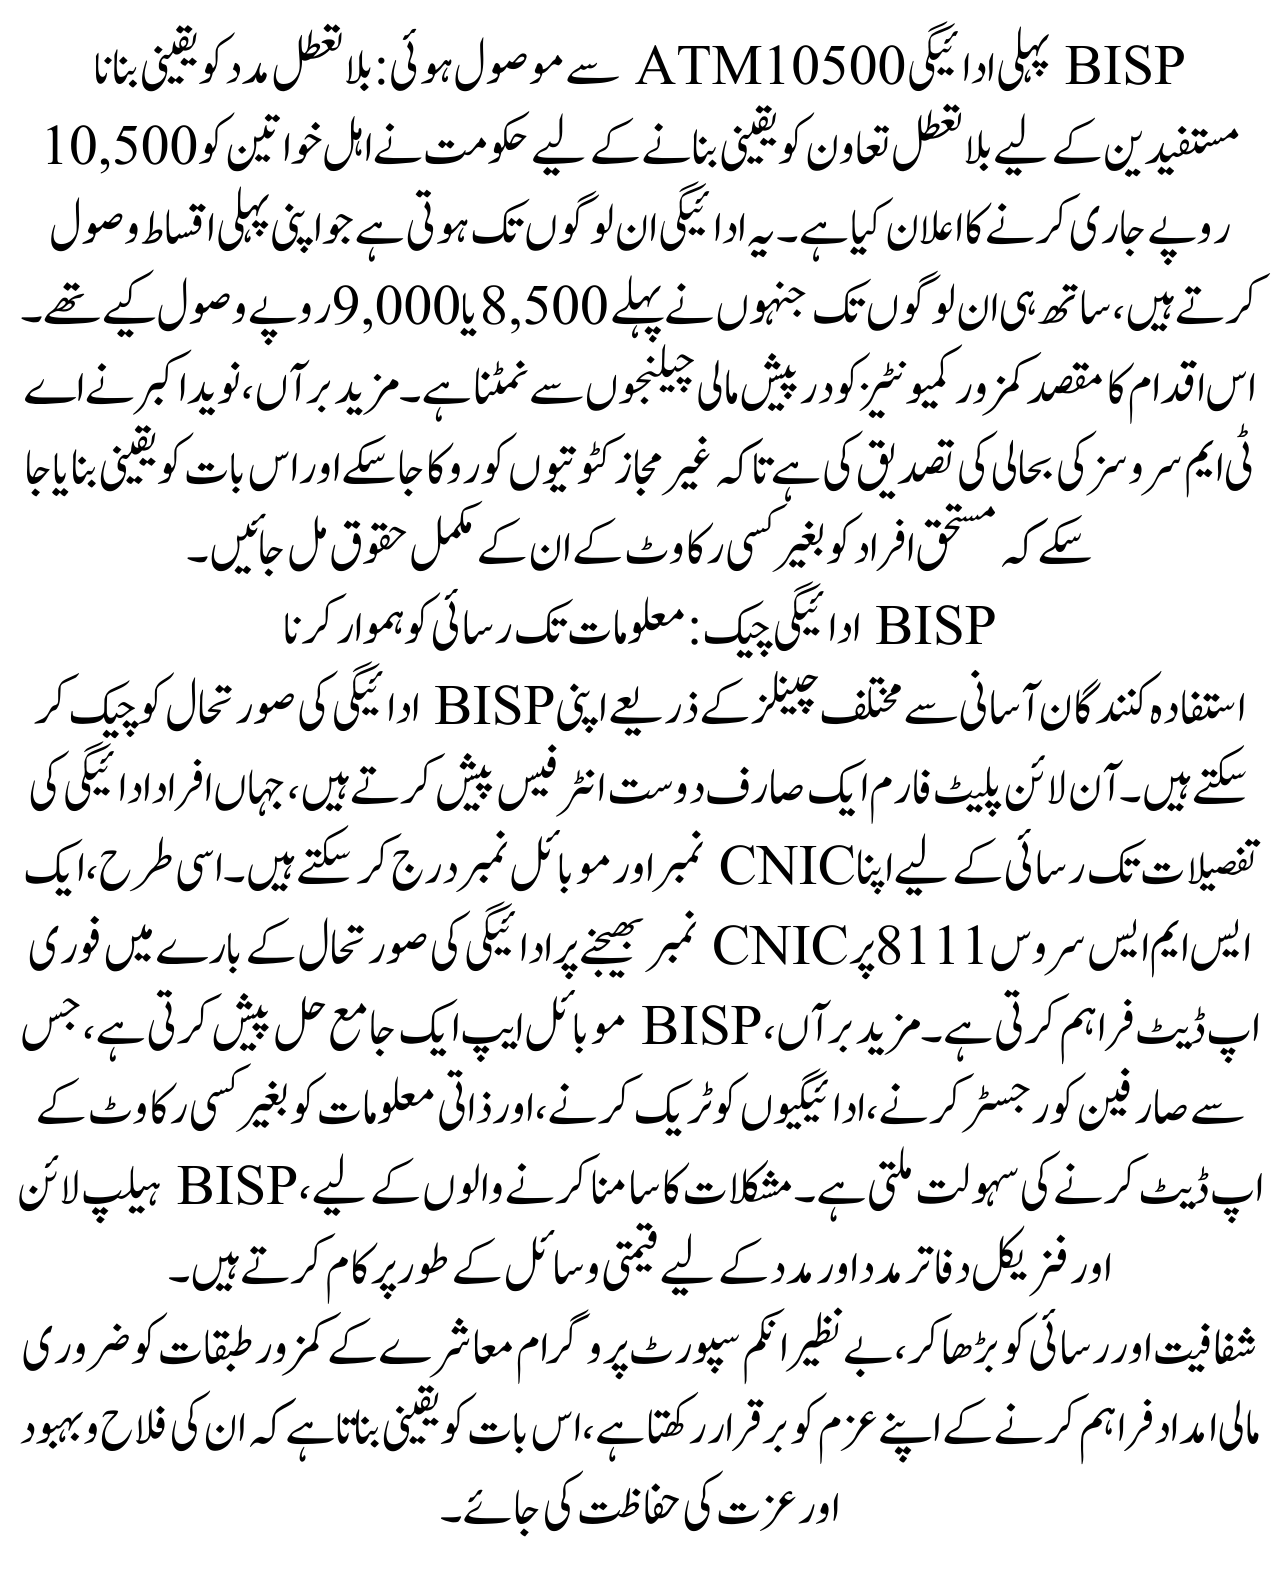 Today's Shocking News: BISP First Payment